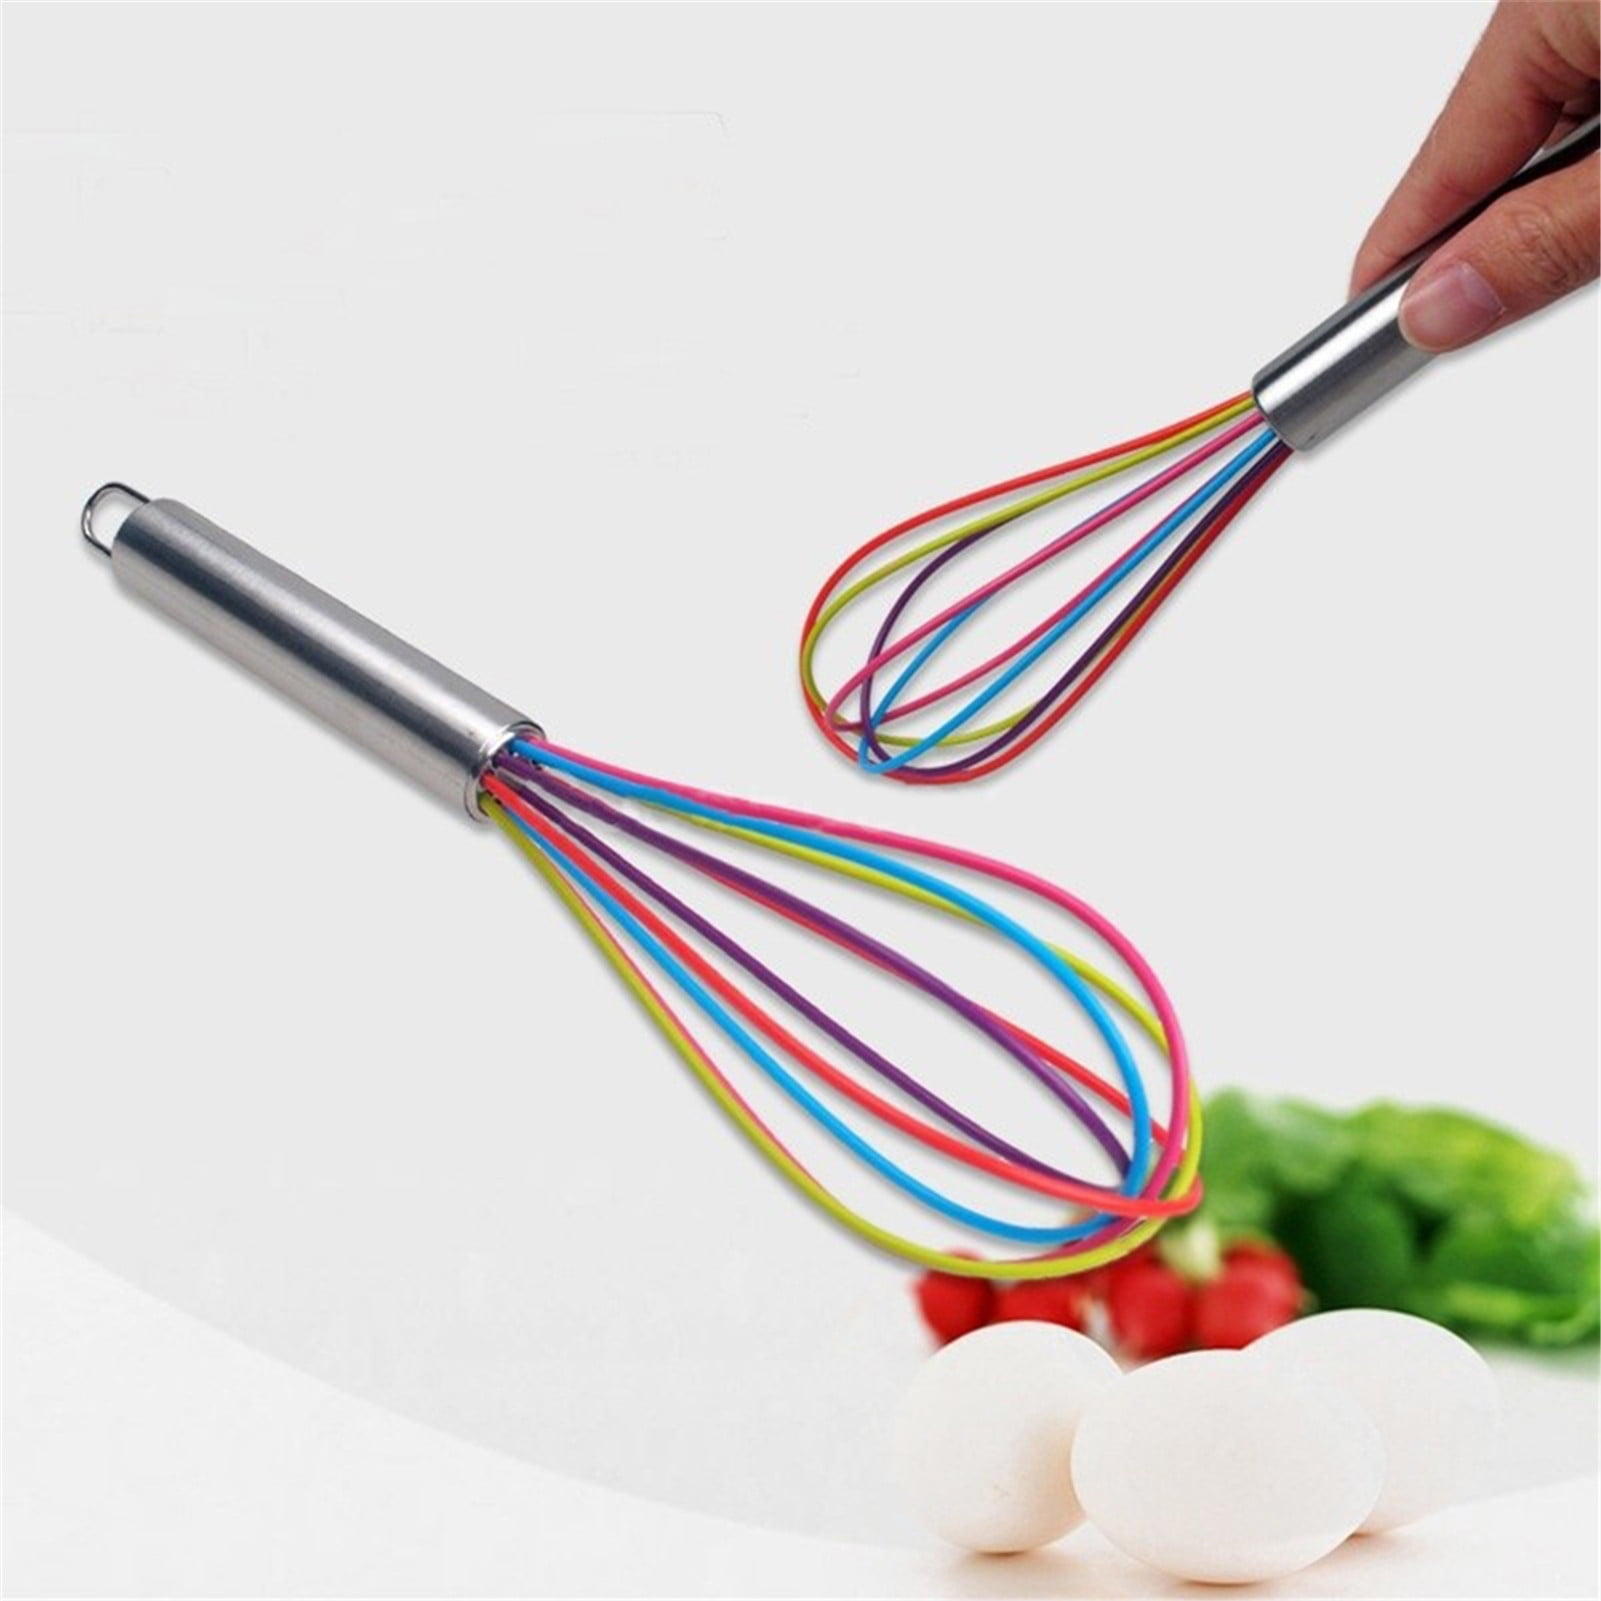 Travelwant Stainless Steel Balloon Wire Whisk, Heavy Duty Metal Whisks for  Cooking, Hand Mixing Kitchen Tool, Egg Beater, For Stirring, Blending